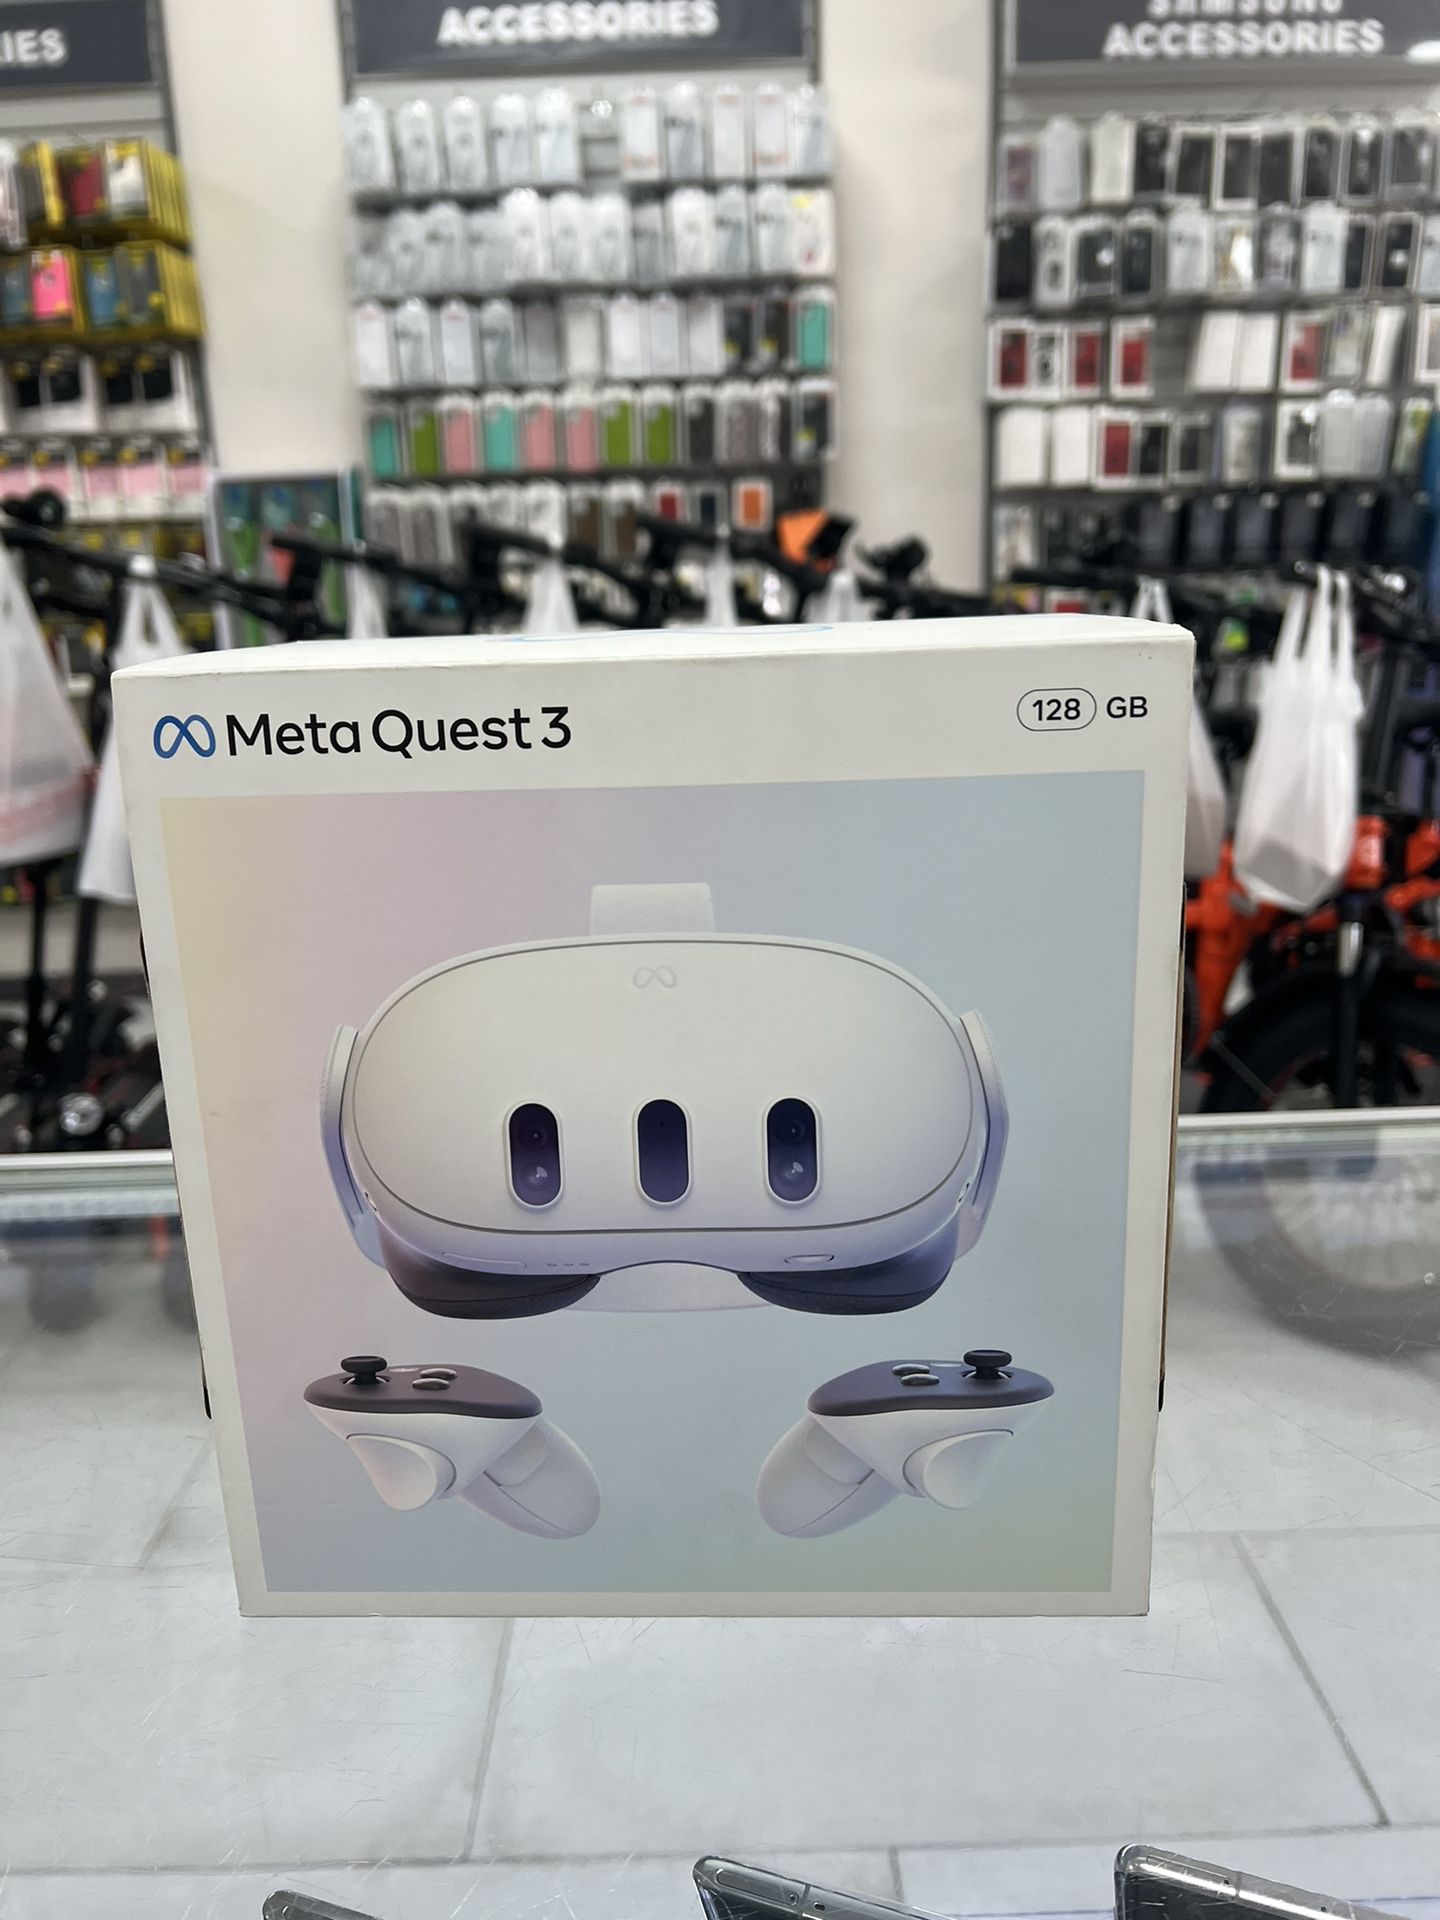 MetaQuest 3 128GB New! Finance For $50 Down Payment!!